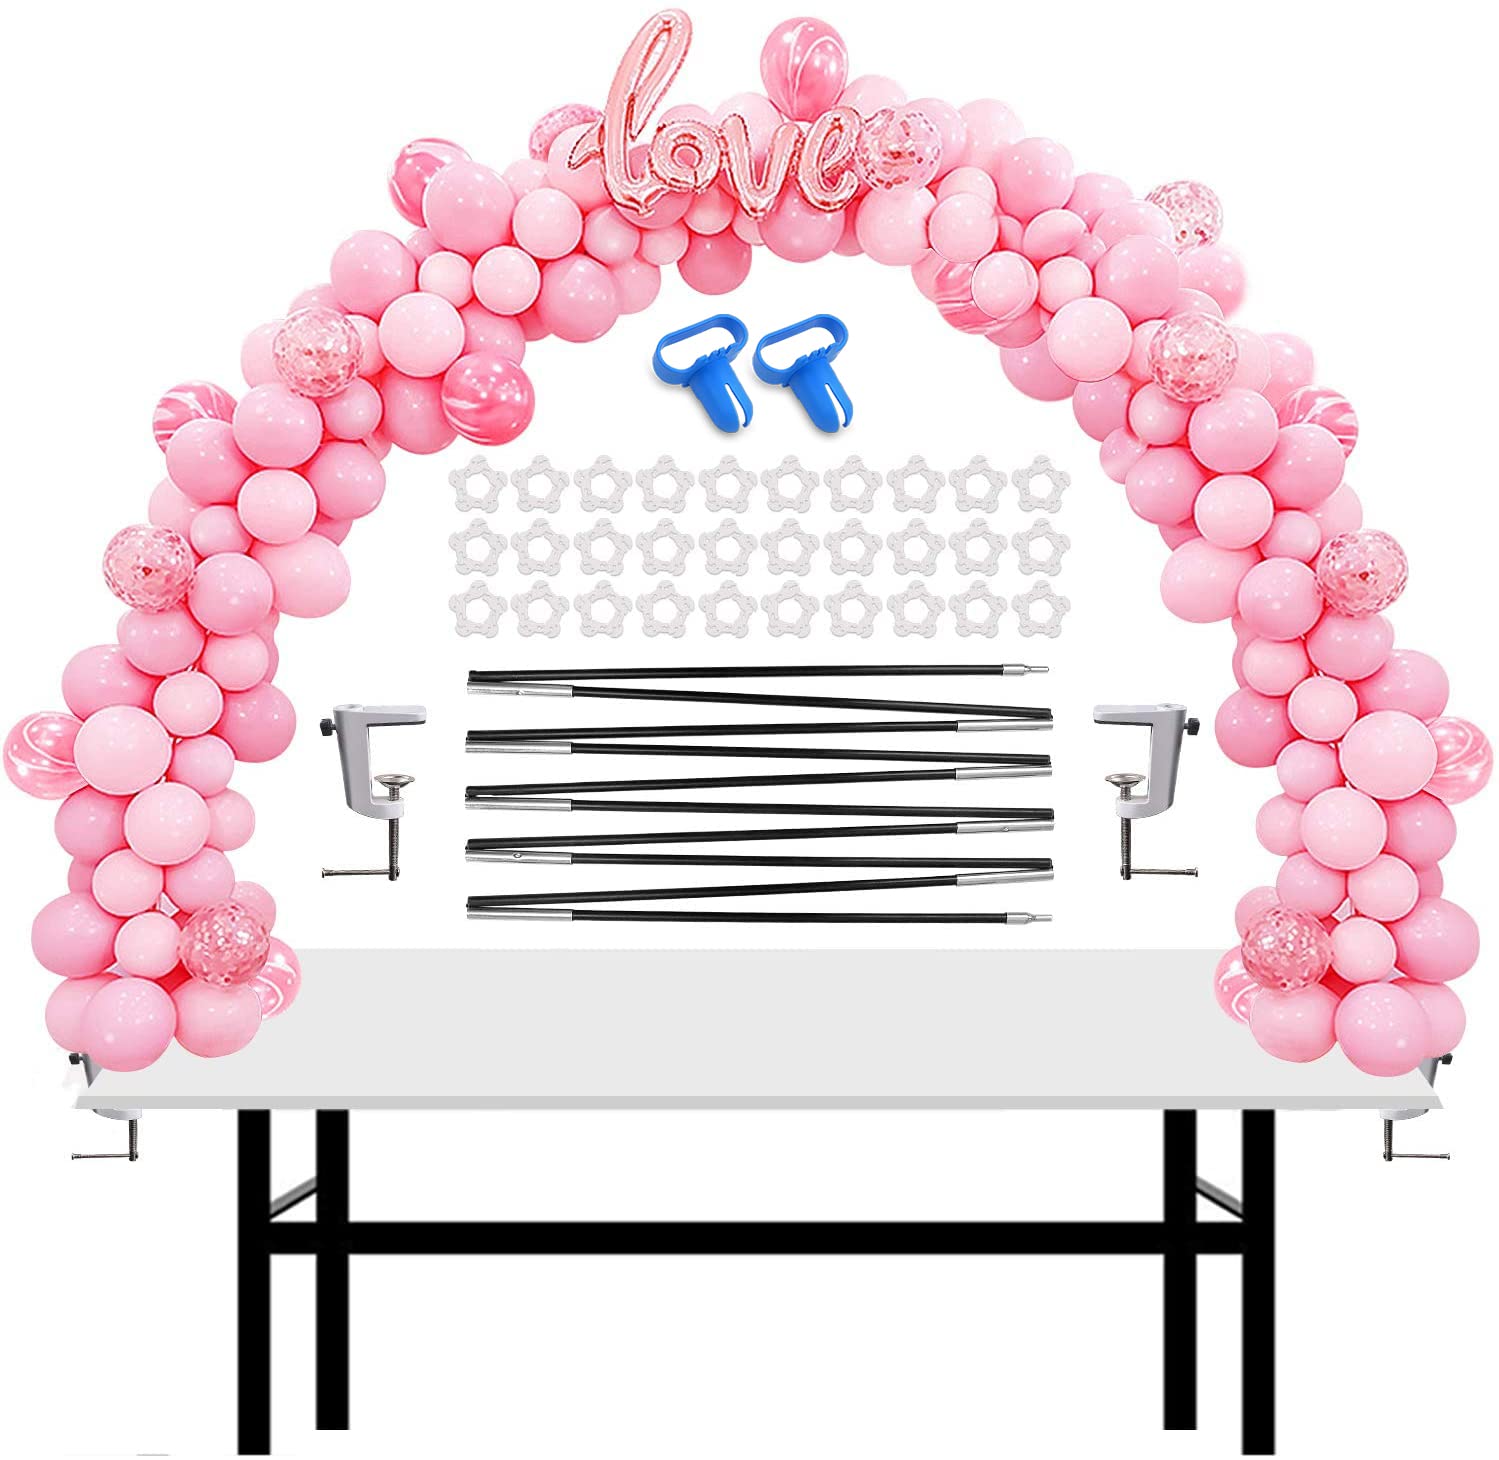 Book Cover Table Balloon Arch Kit Adjustable for Baby Shower, Birthday, Wedding, Festival, Graduation Decorations Party Supplies Style_Upgrade